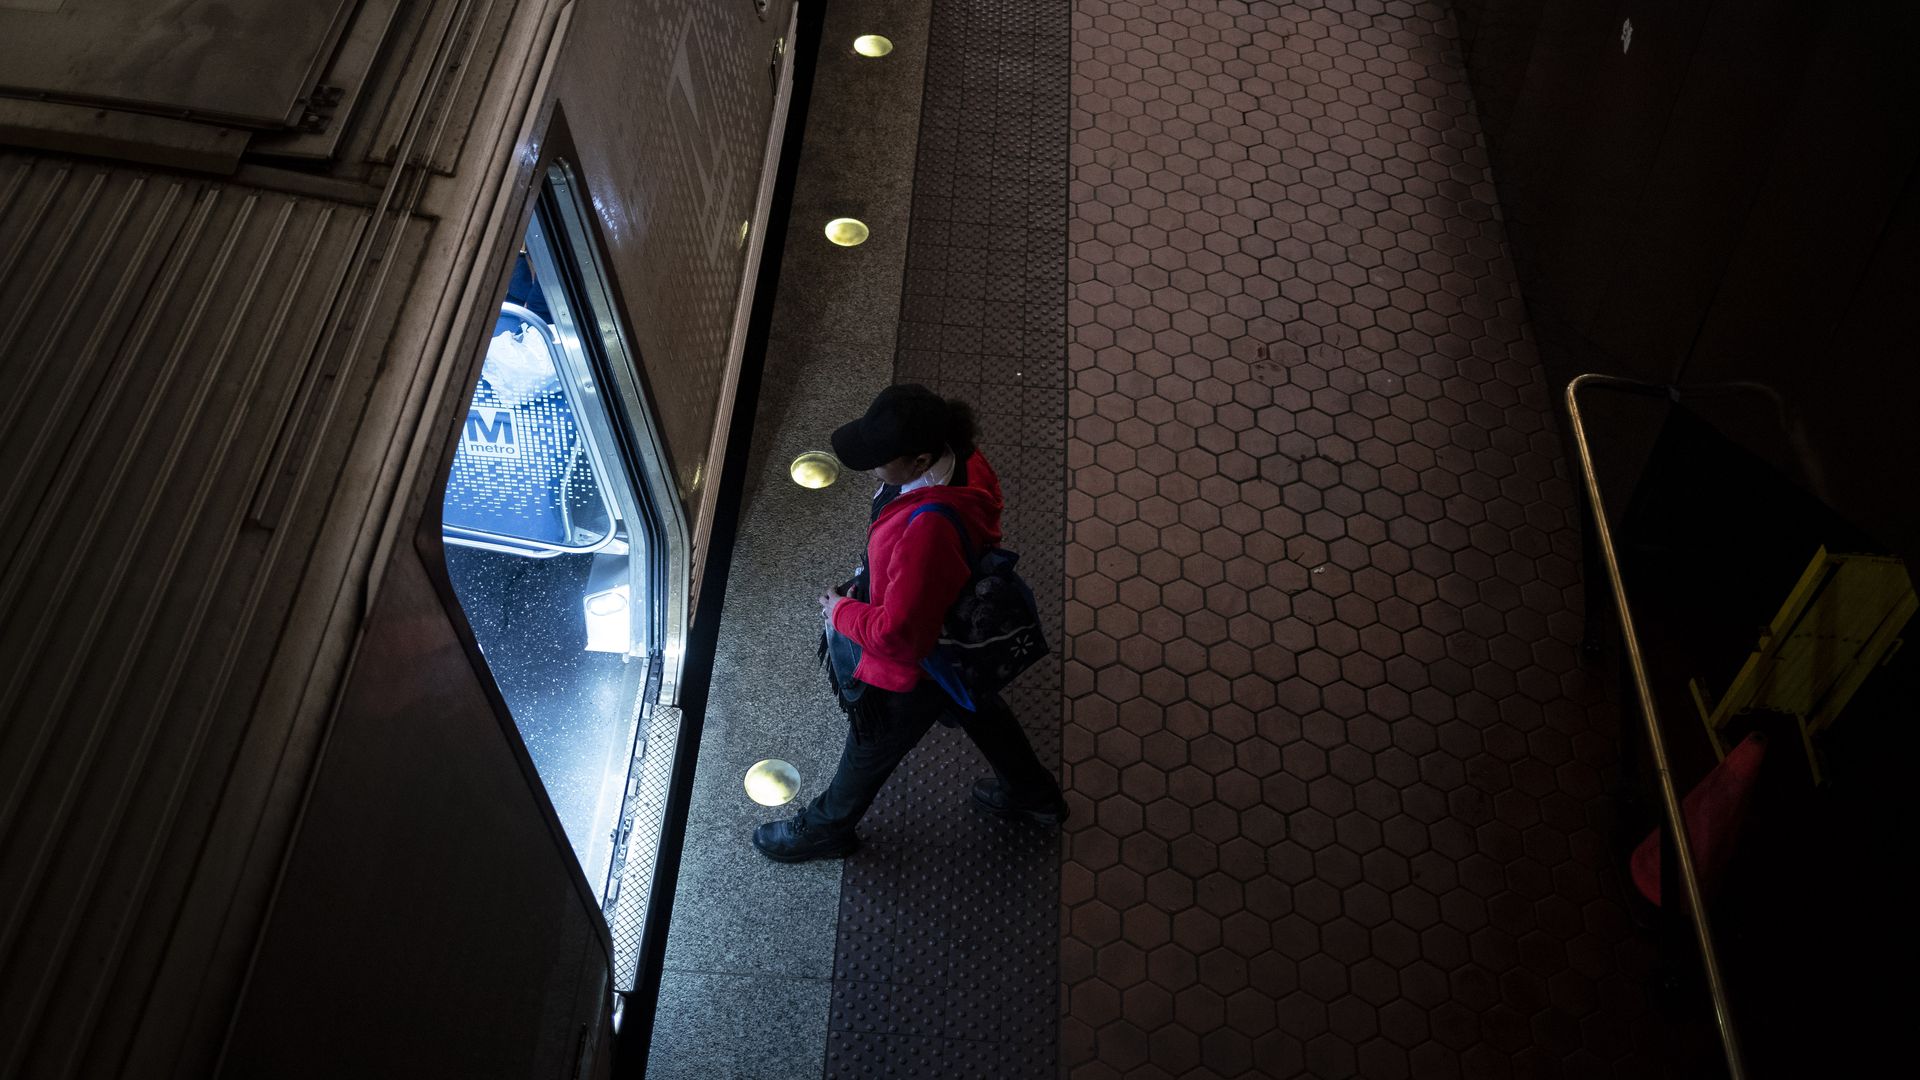 Person viewed from above walking into Metro train